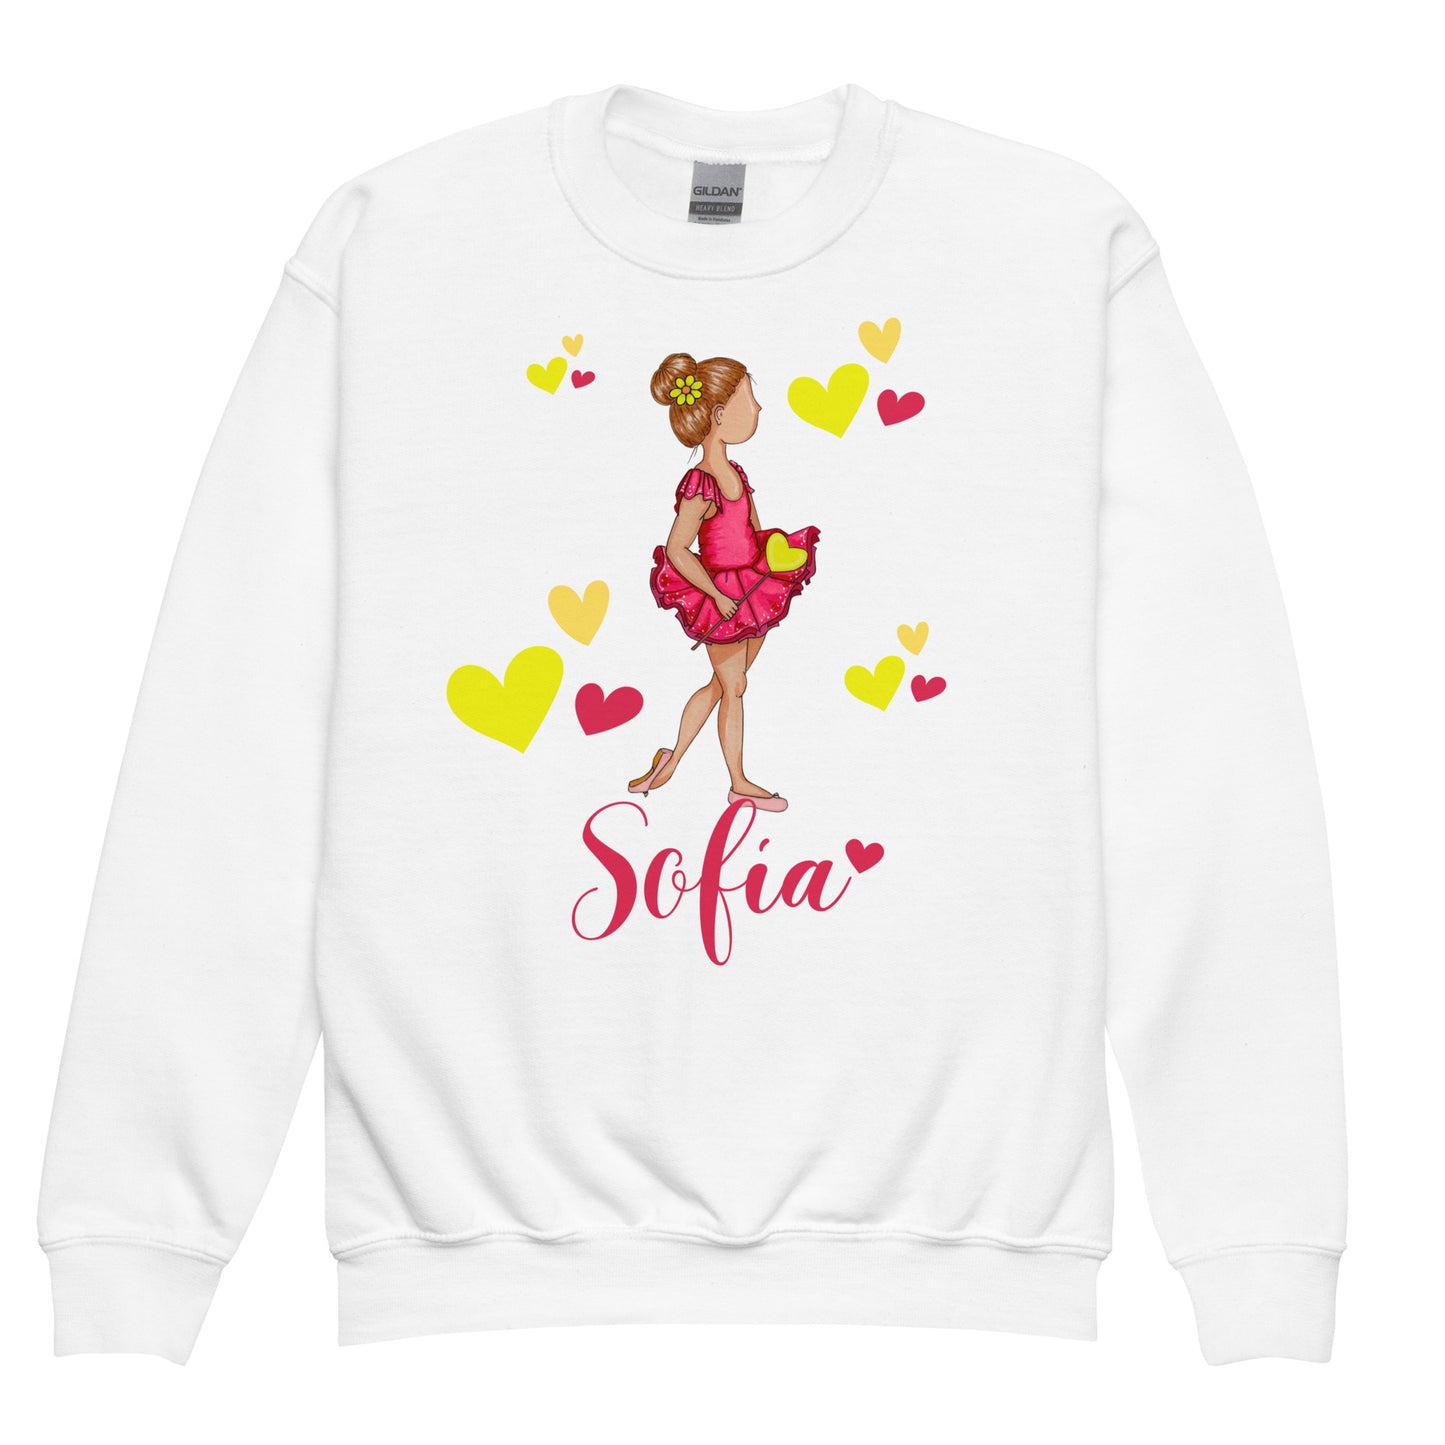 a white sweatshirt with a girl in a pink dress and hearts